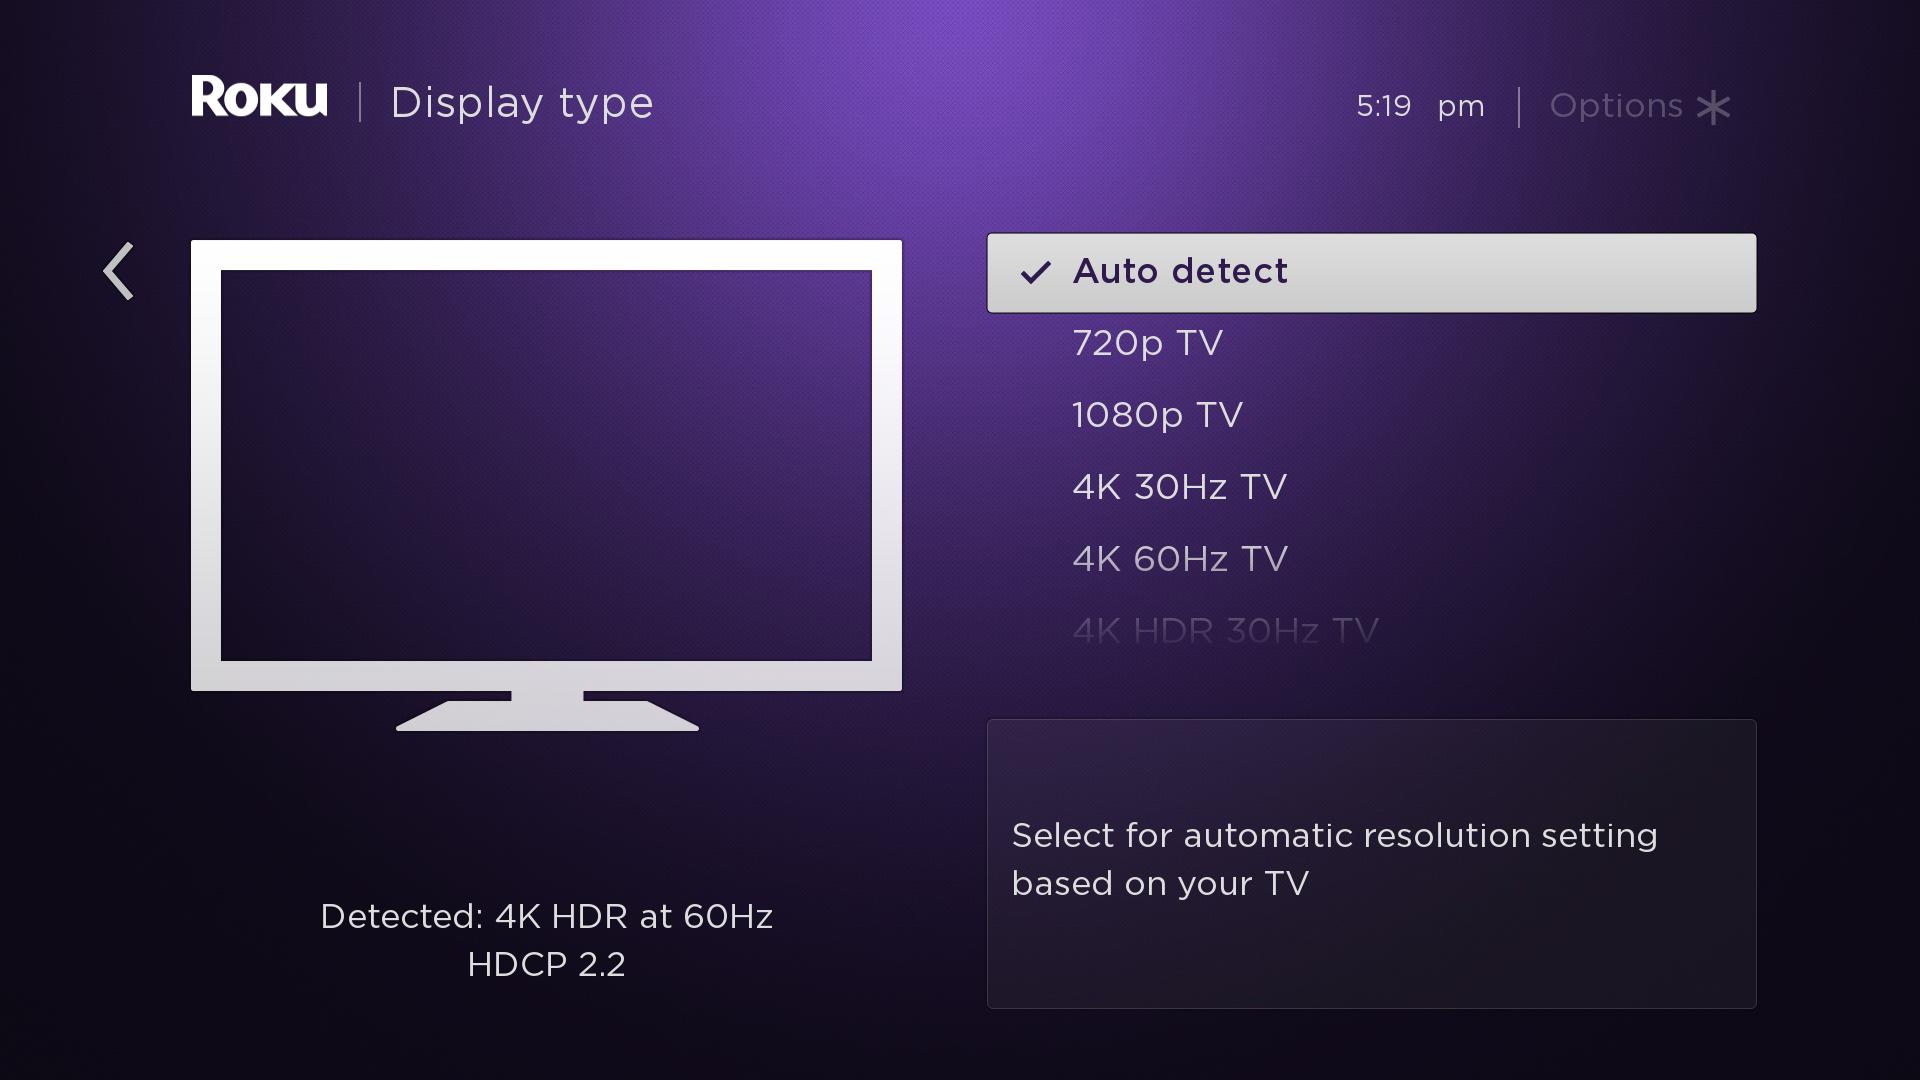 Access the Roku home screen and go to "Settings".
Select "Display type" and choose the appropriate resolution for your TV.